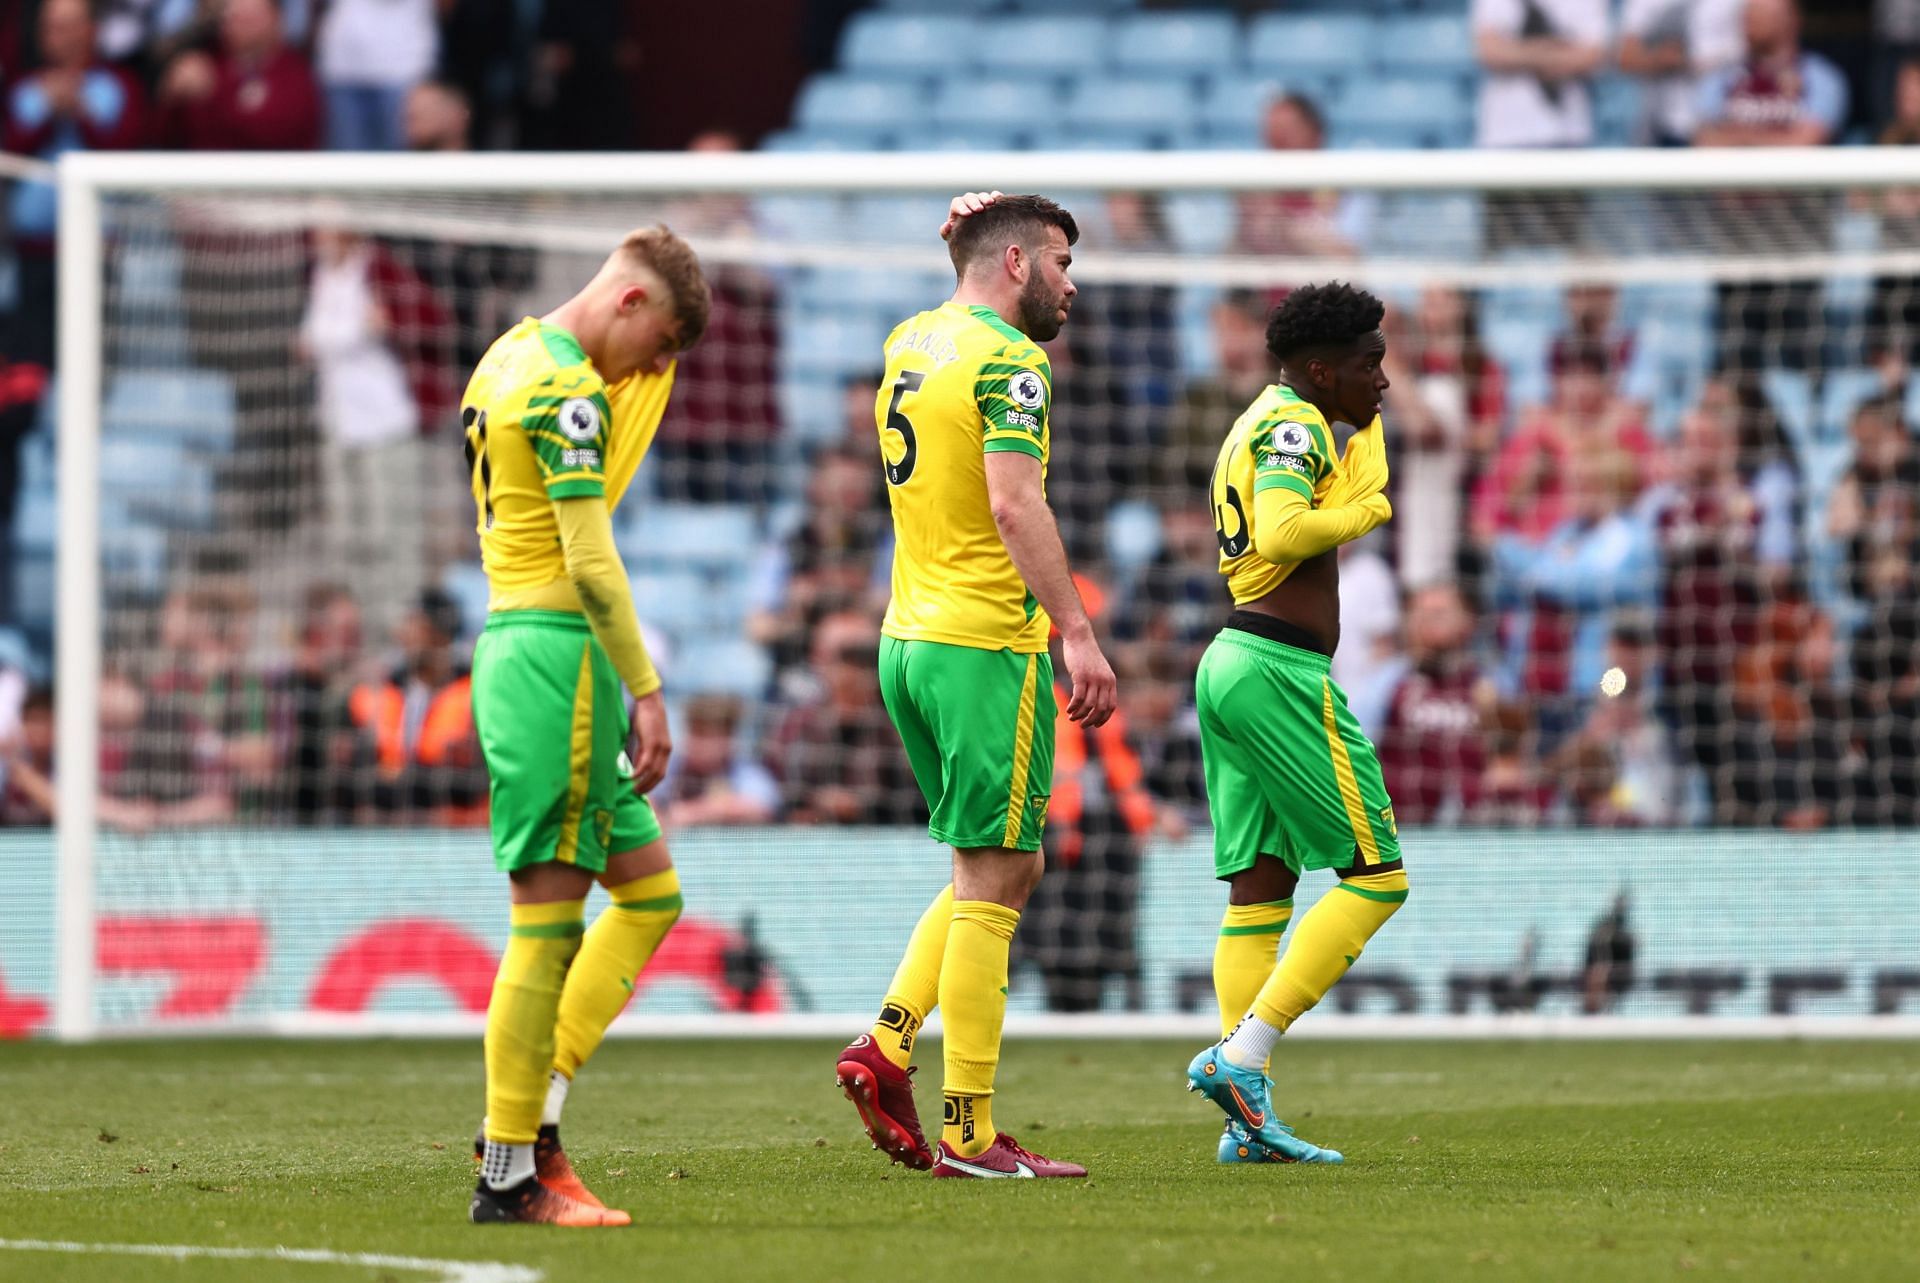 Norwich City will play in the Championship next season